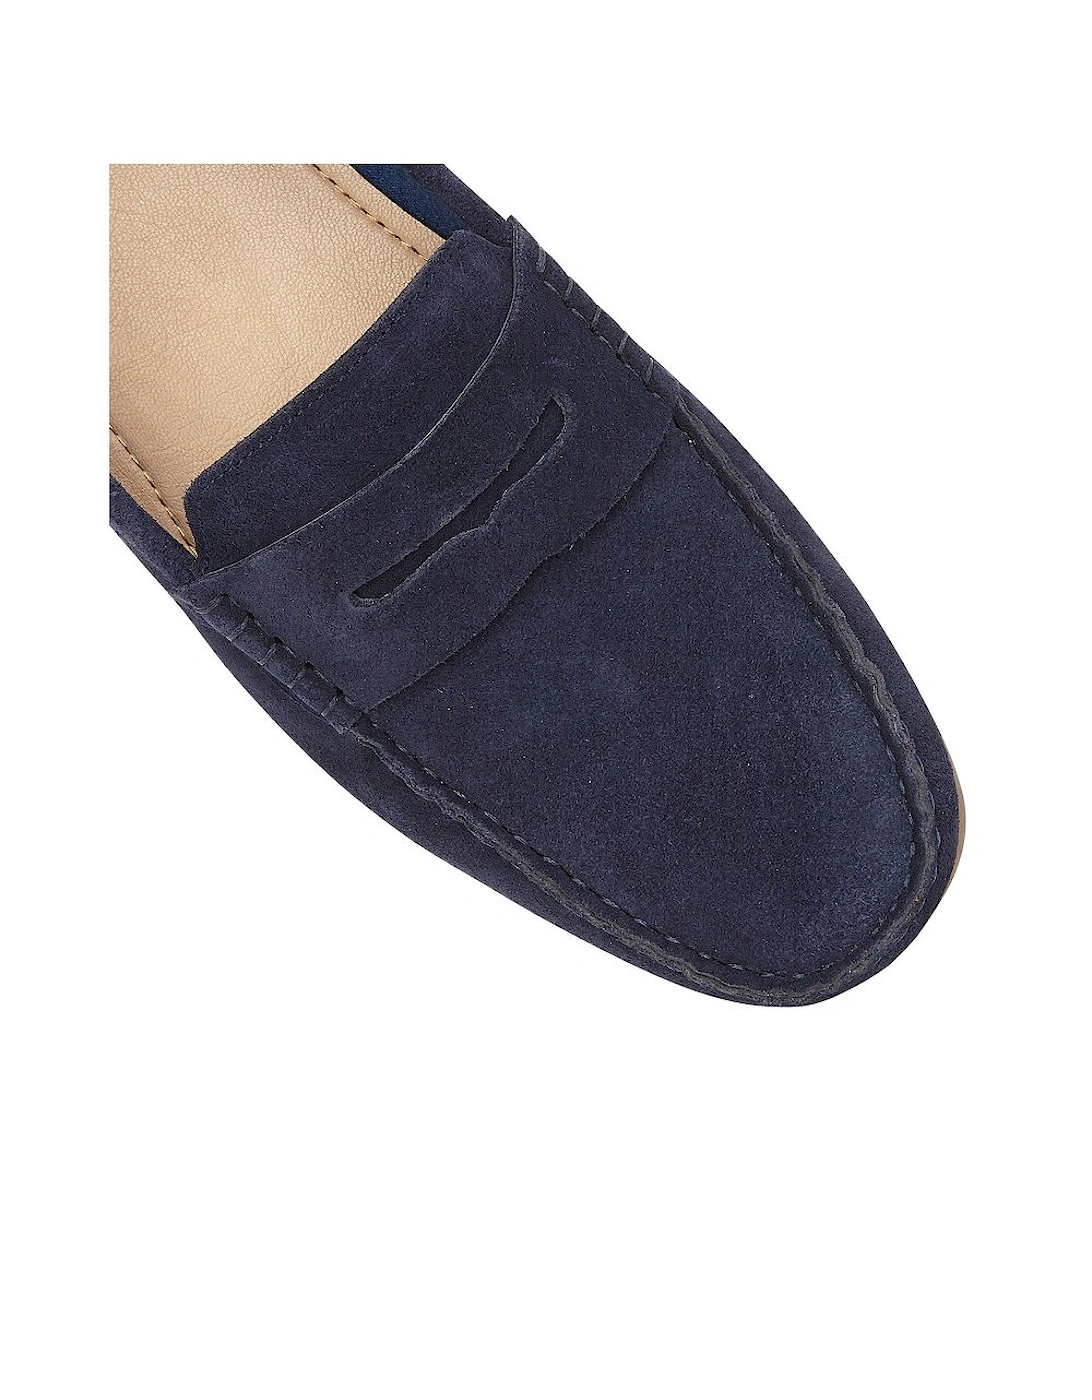 Addison Mens Loafers